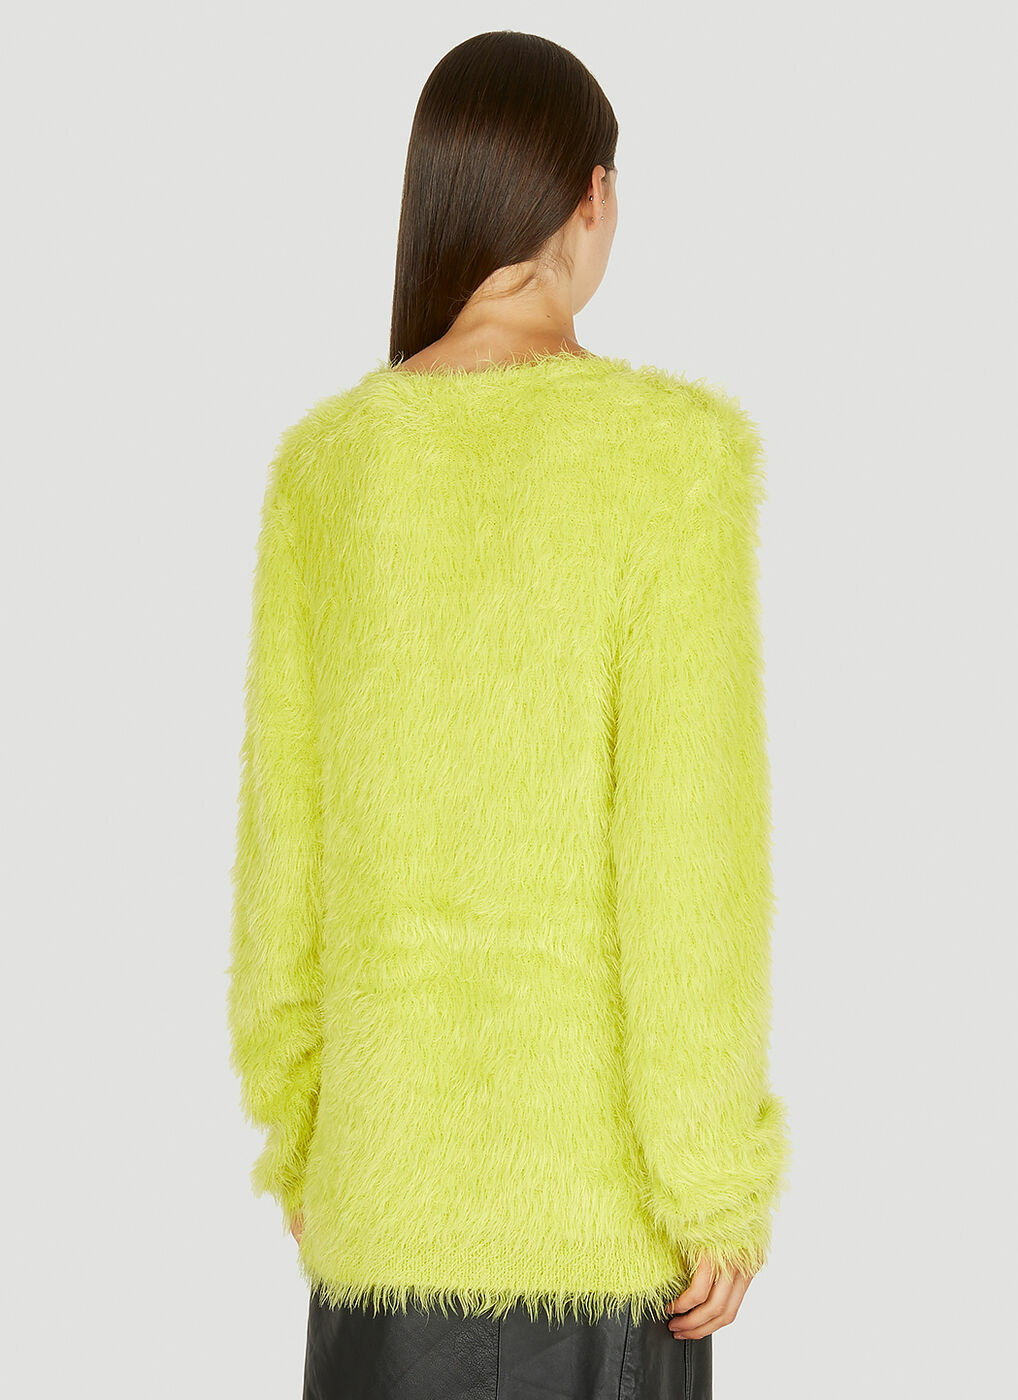 Fluffy Sweater in Yellow 1017 ALYX 9SM